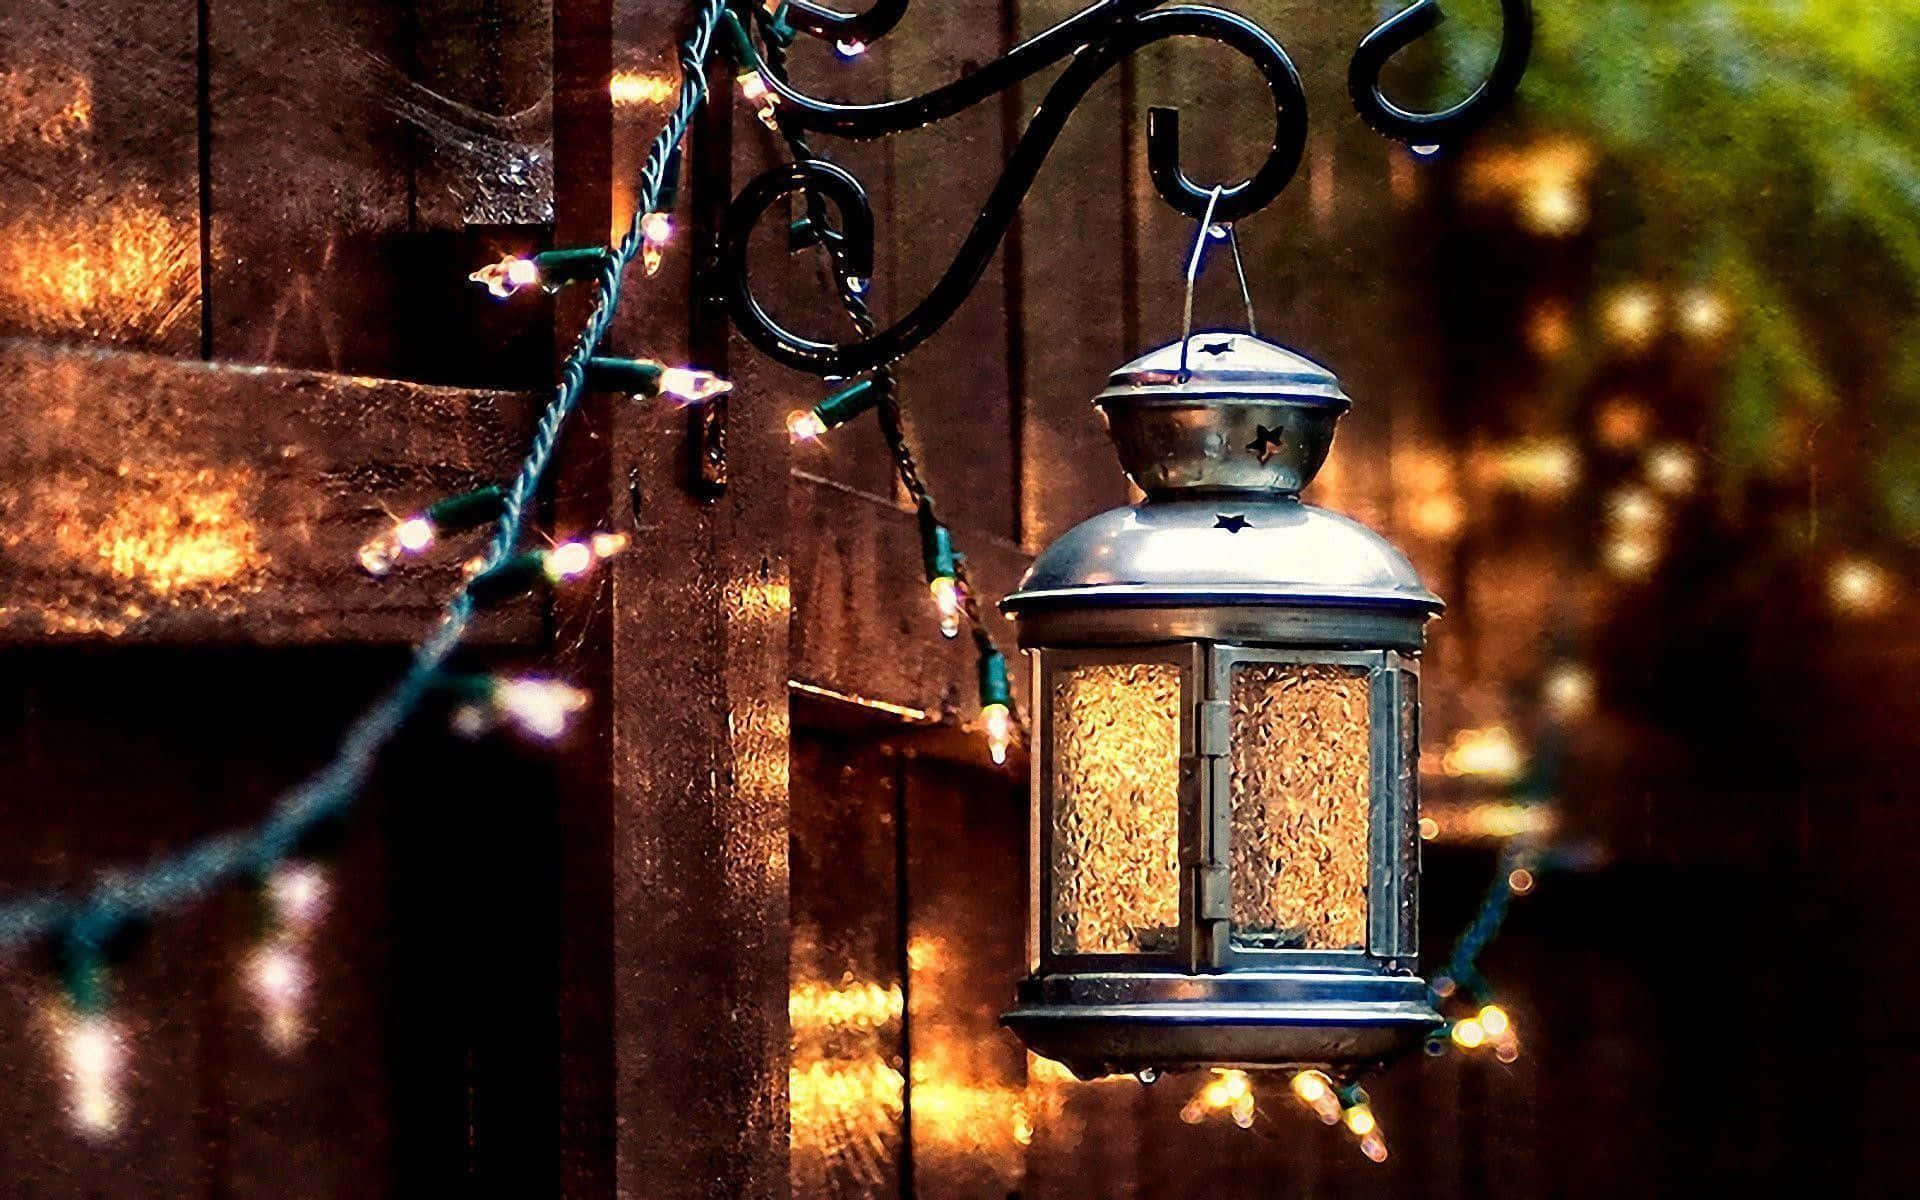 A Lantern Hanging On A Fence With Lights